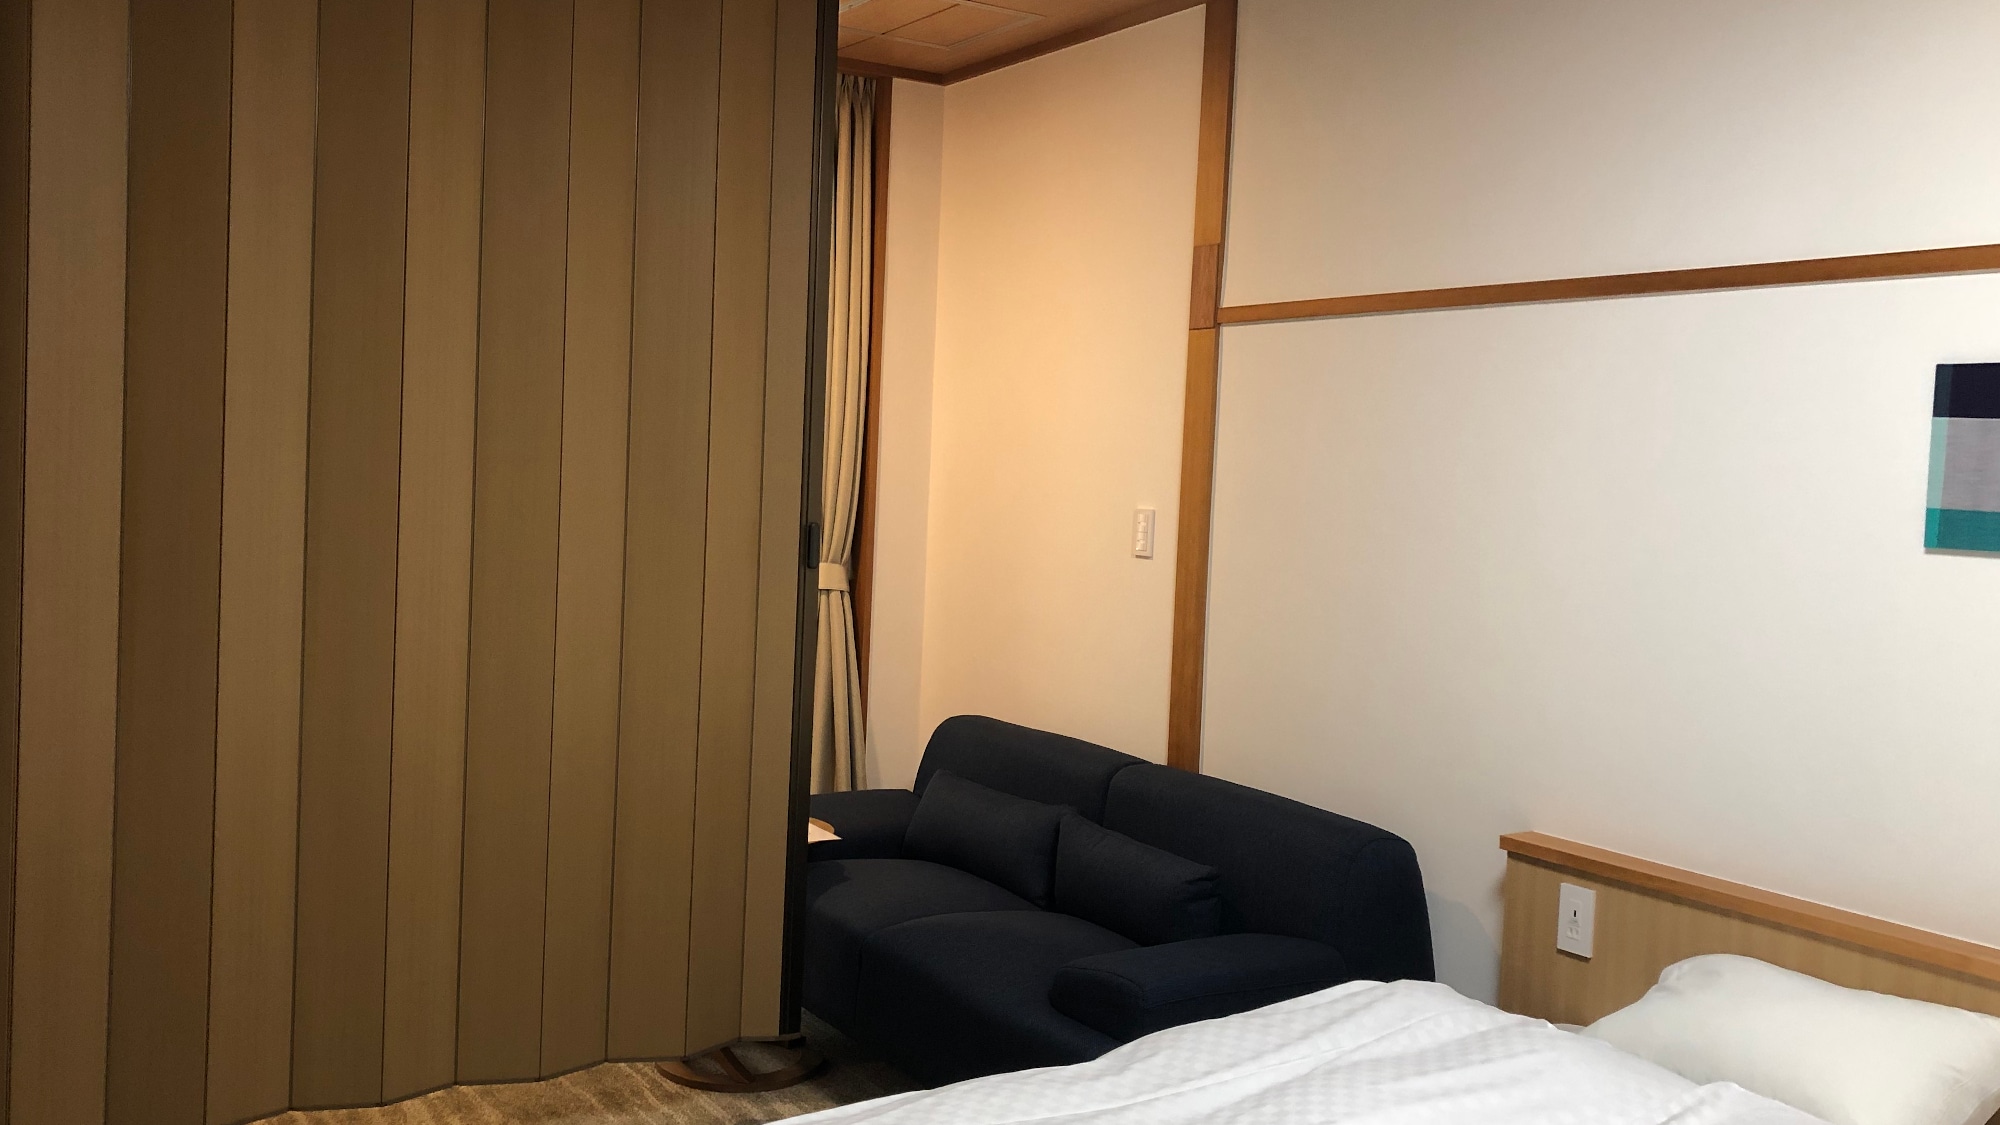 renewal! Guest room with open-air bath ♪ There is a partition in the room, so you can use it as a dressing room.